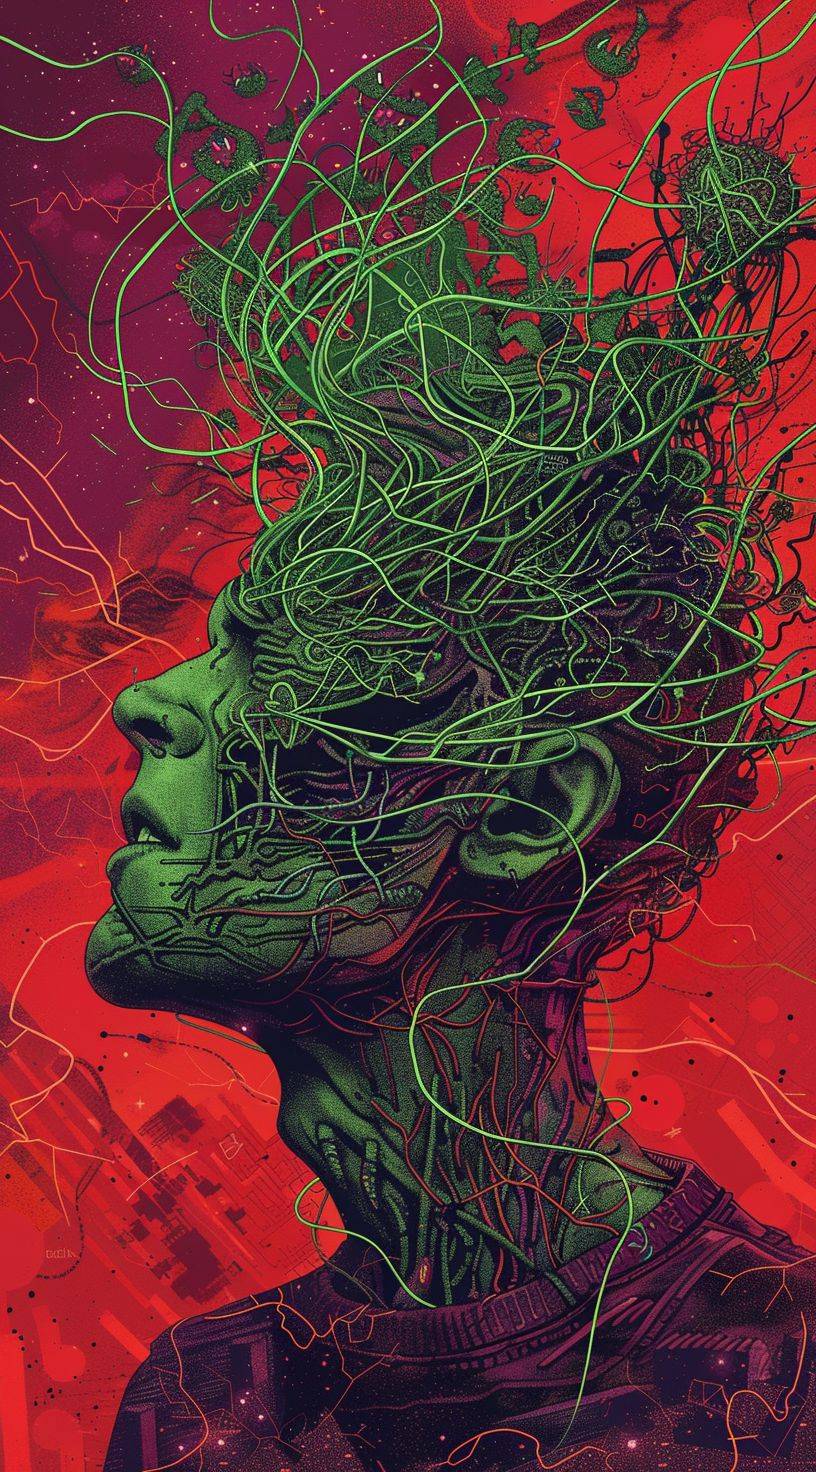 the head of in a red environment, with electricity lines coming from his head, and his head, in the style of interstellar comic book art, purple and green, hyper-detailed illustrations, dan mumford, josan gonzalez, trompe-l'œil illusionistic detail, cybersteampunk --ar 62:111